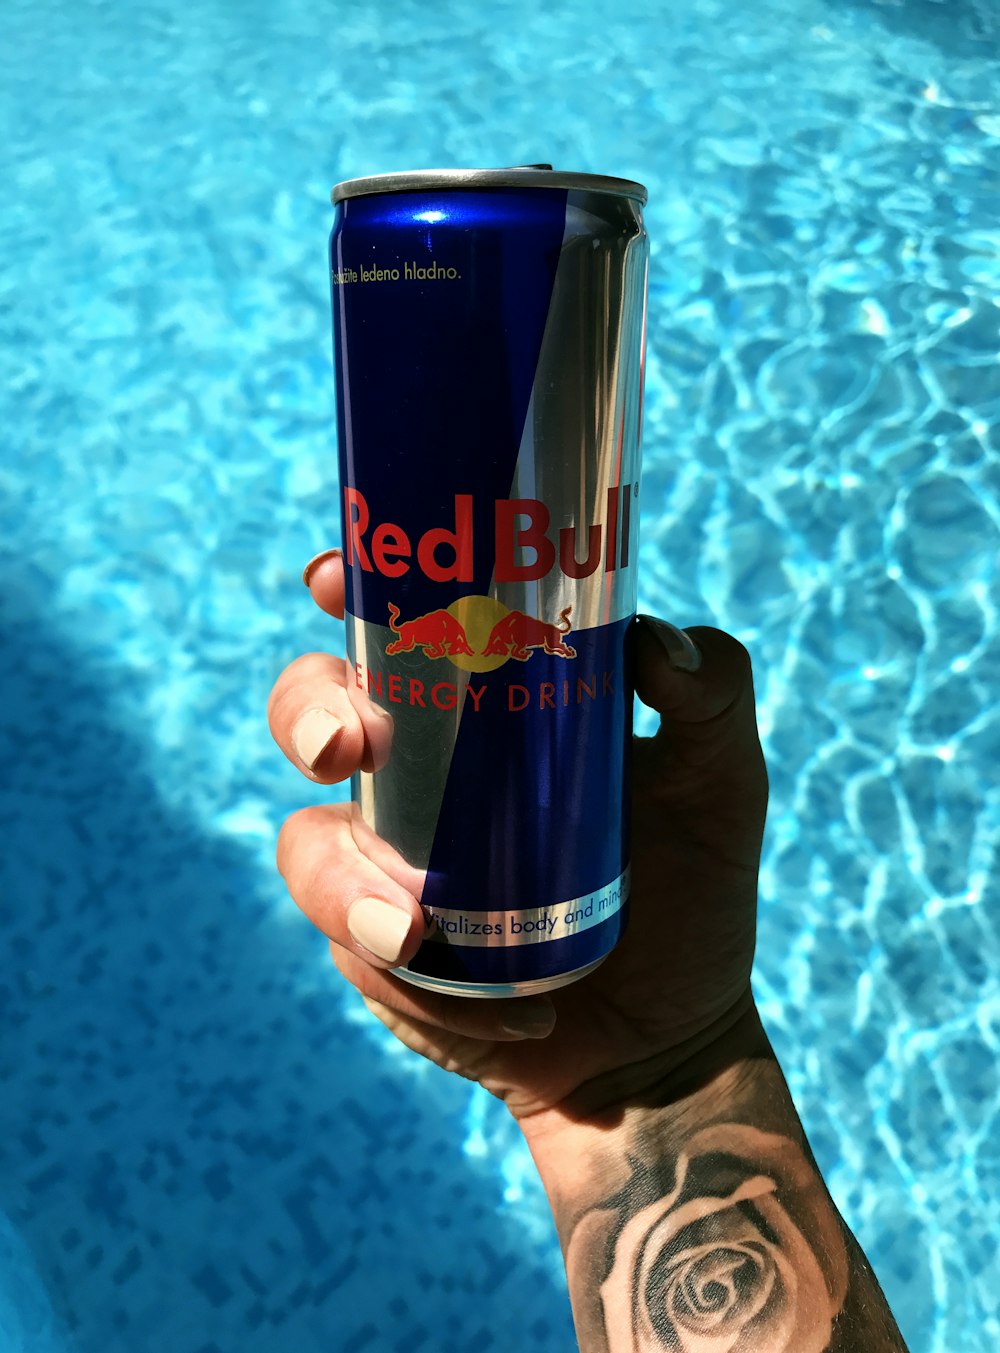 Red energy drink can photo – Free Red bull Image on Unsplash